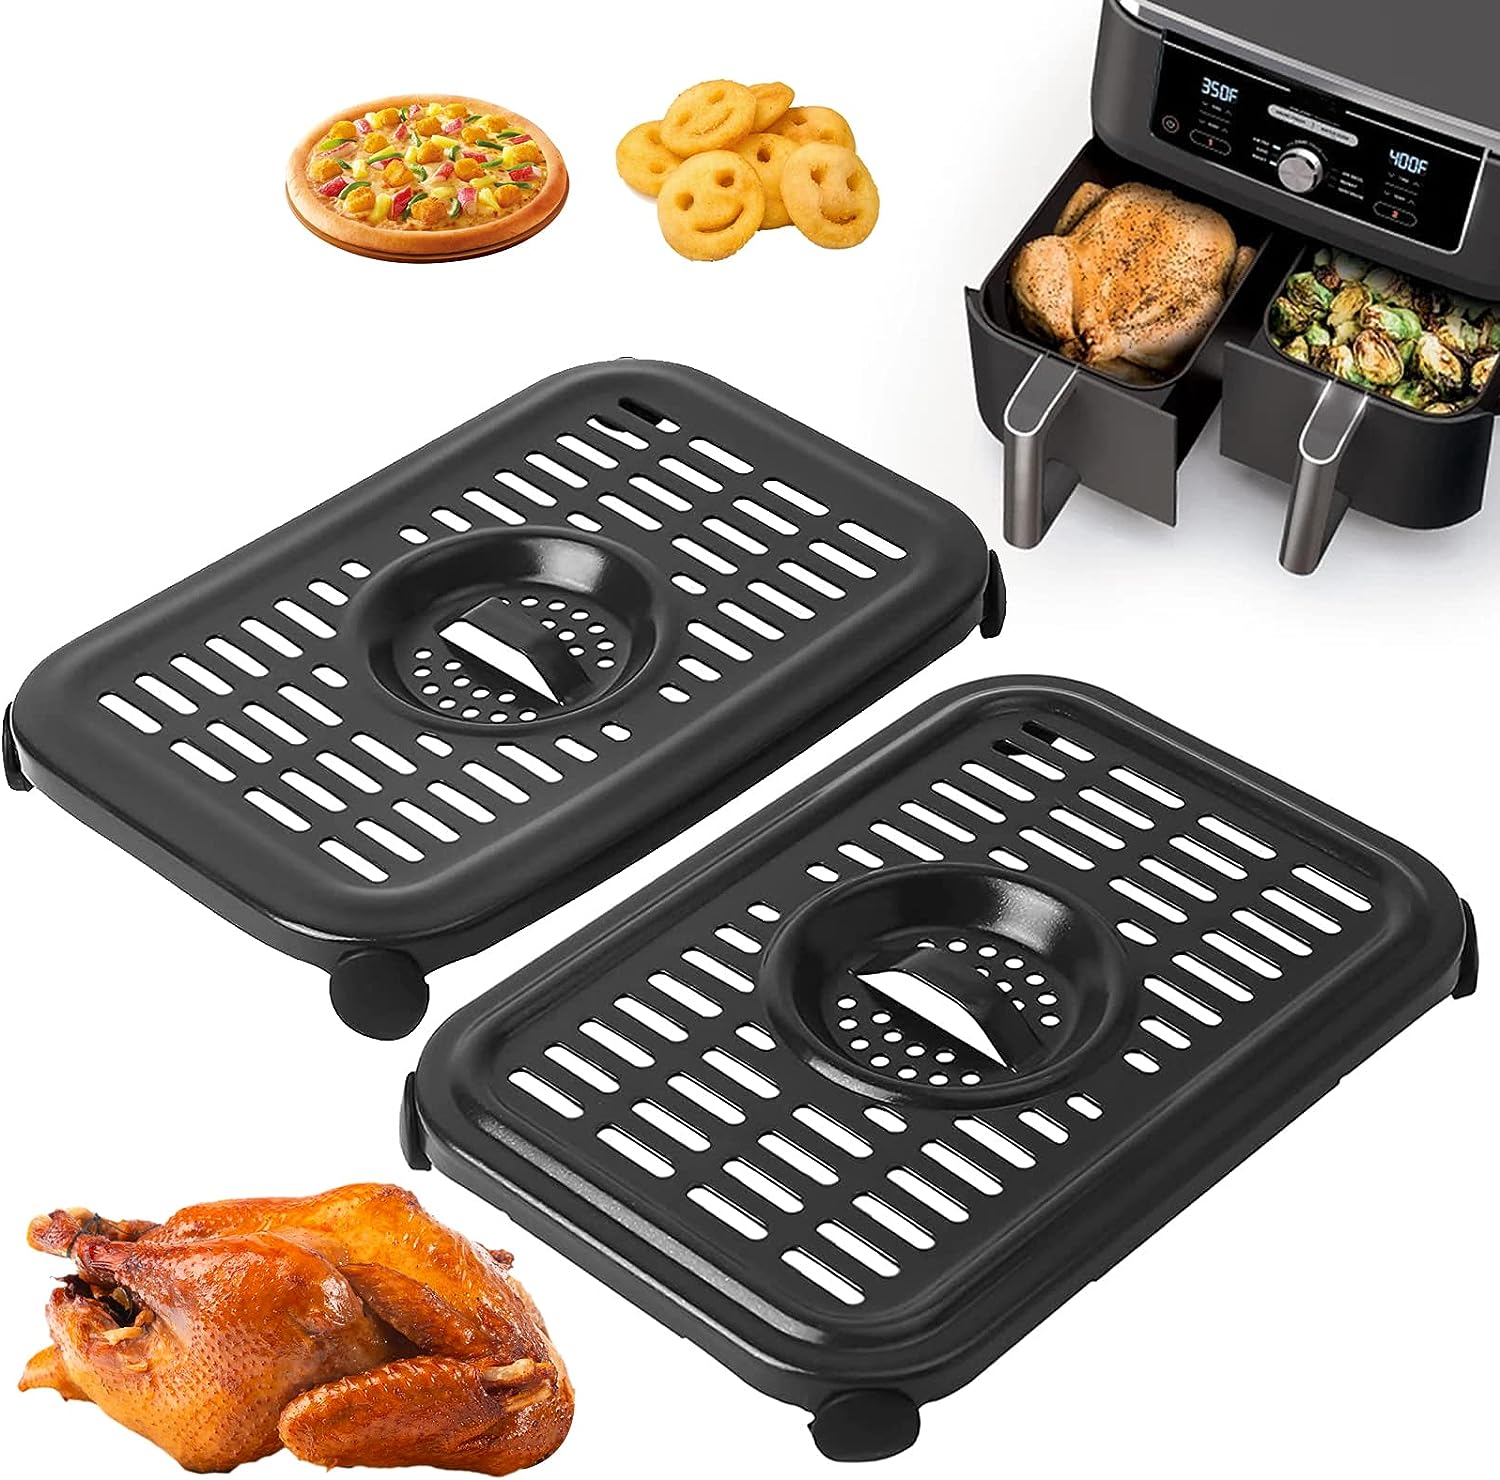 Grill Griddle Plate Compatiable with Ninja Foodi Grill with Air Fryer